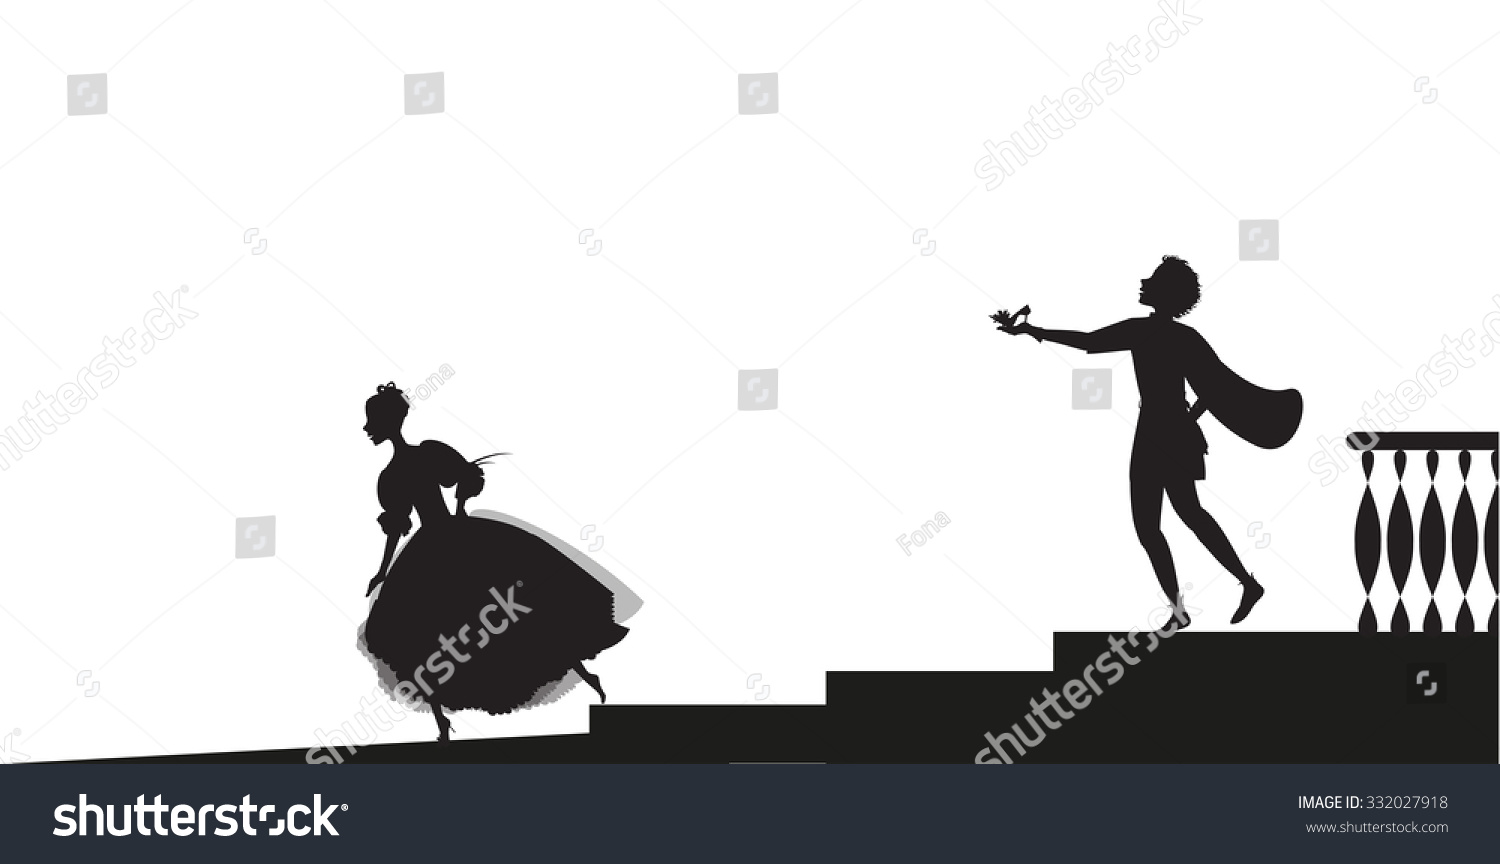 SVG of Cinderella runs out from ball and looses her shoe, and prince hails her and gives her shoes, shadows, fairytale svg